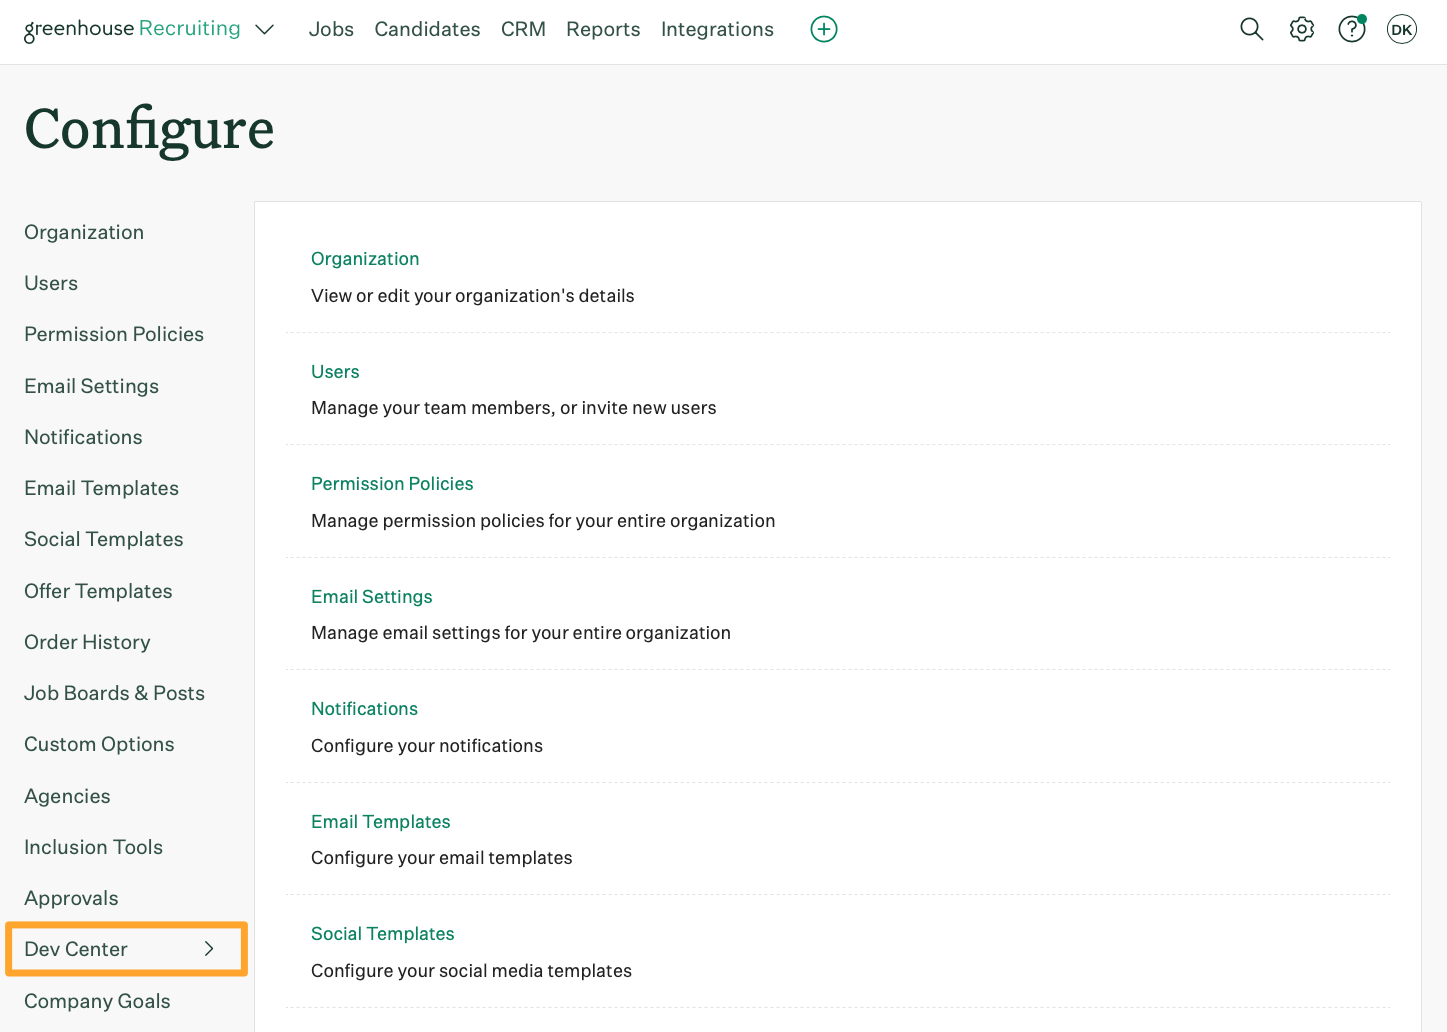 The Configure page shows the Dev Center button highlighted in a marigold emphasis box